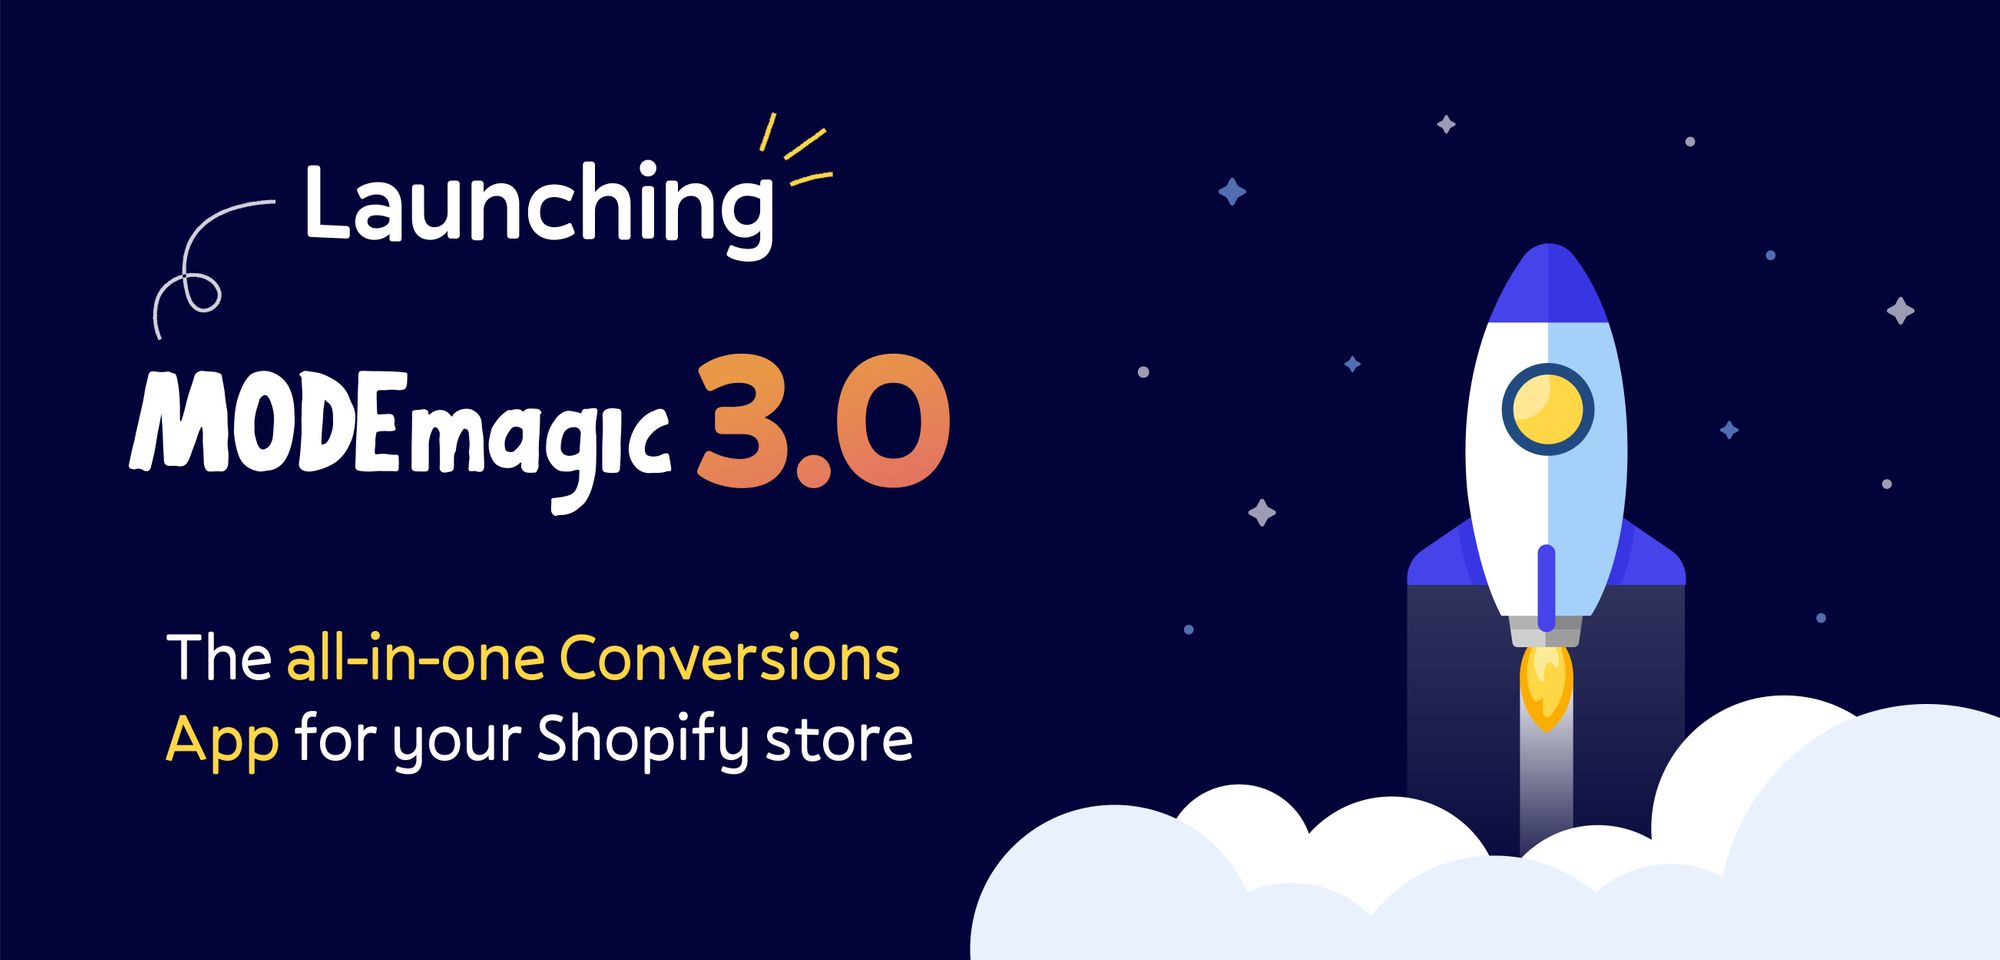 Meet ModeMagic 3.0: the Conversion OS for Your Shopify Store